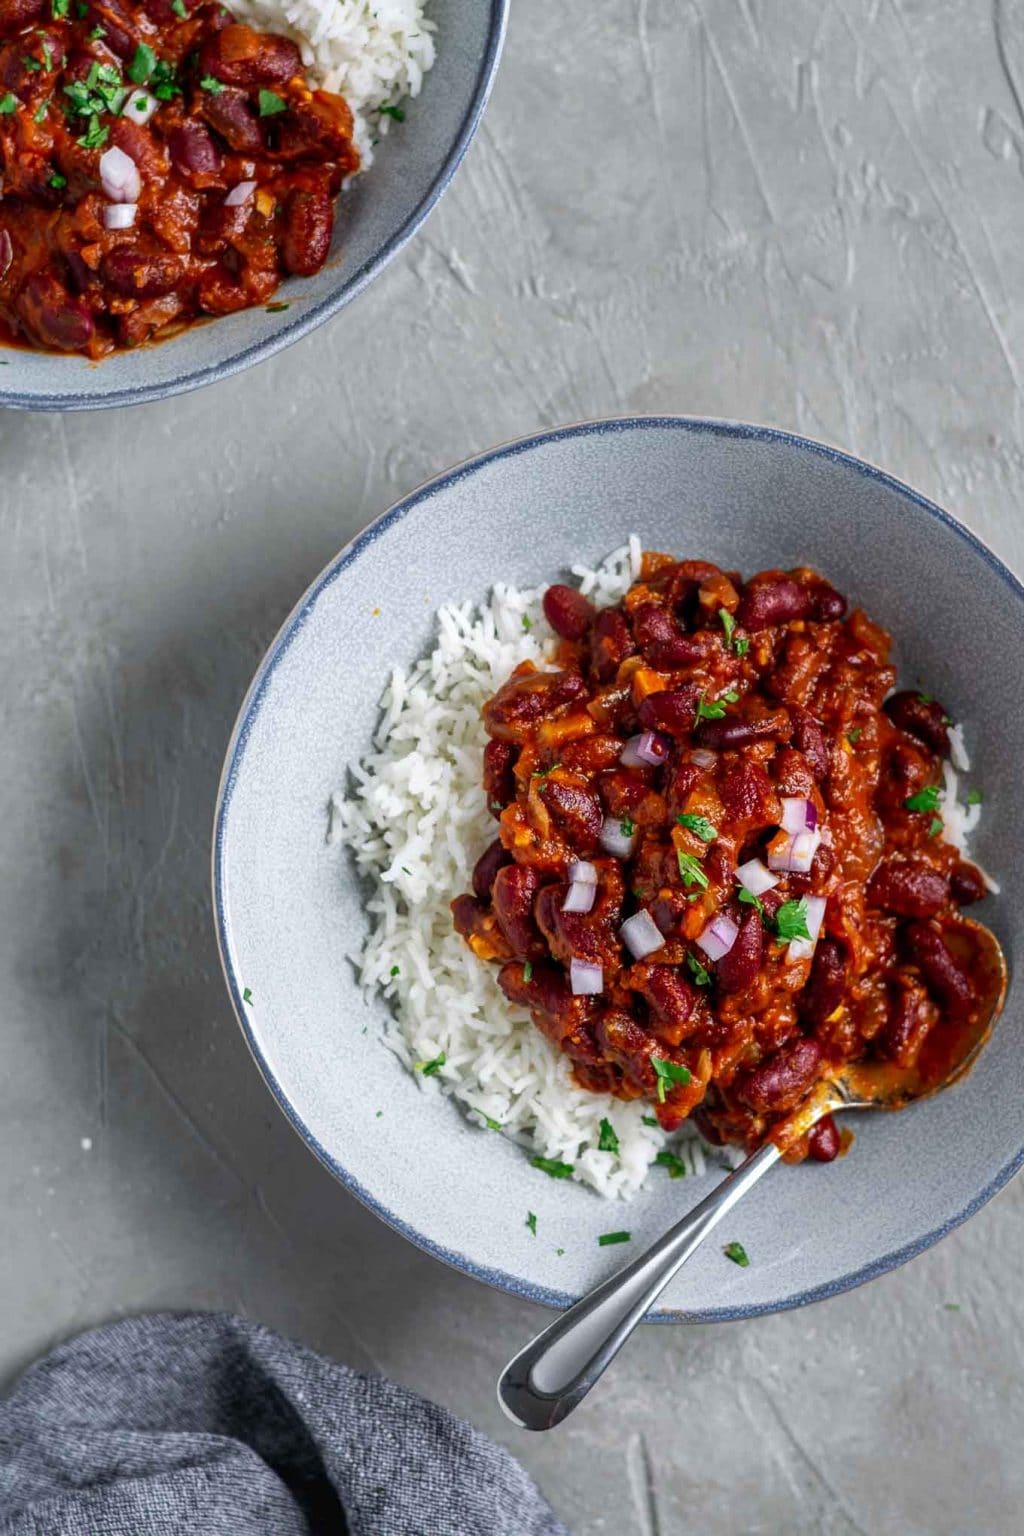 Afghan Kidney bean curry (lubya) is served in a bowl atop basmati rice and garnished with cilantro and minced red onion.